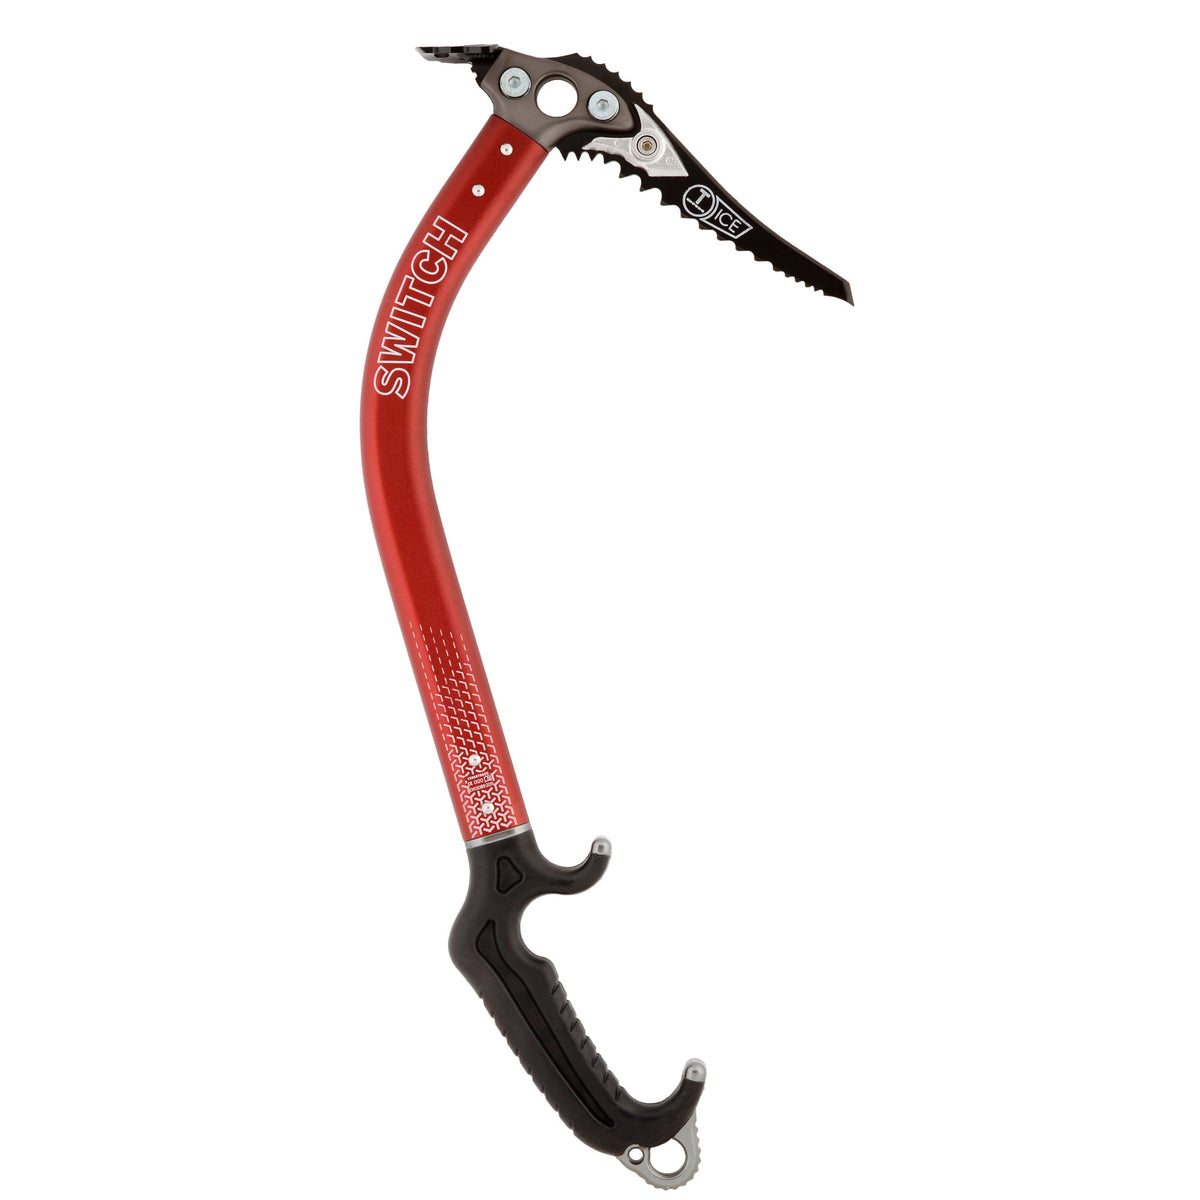 DMM Switch Ice Axe, side view shown in black and red colours